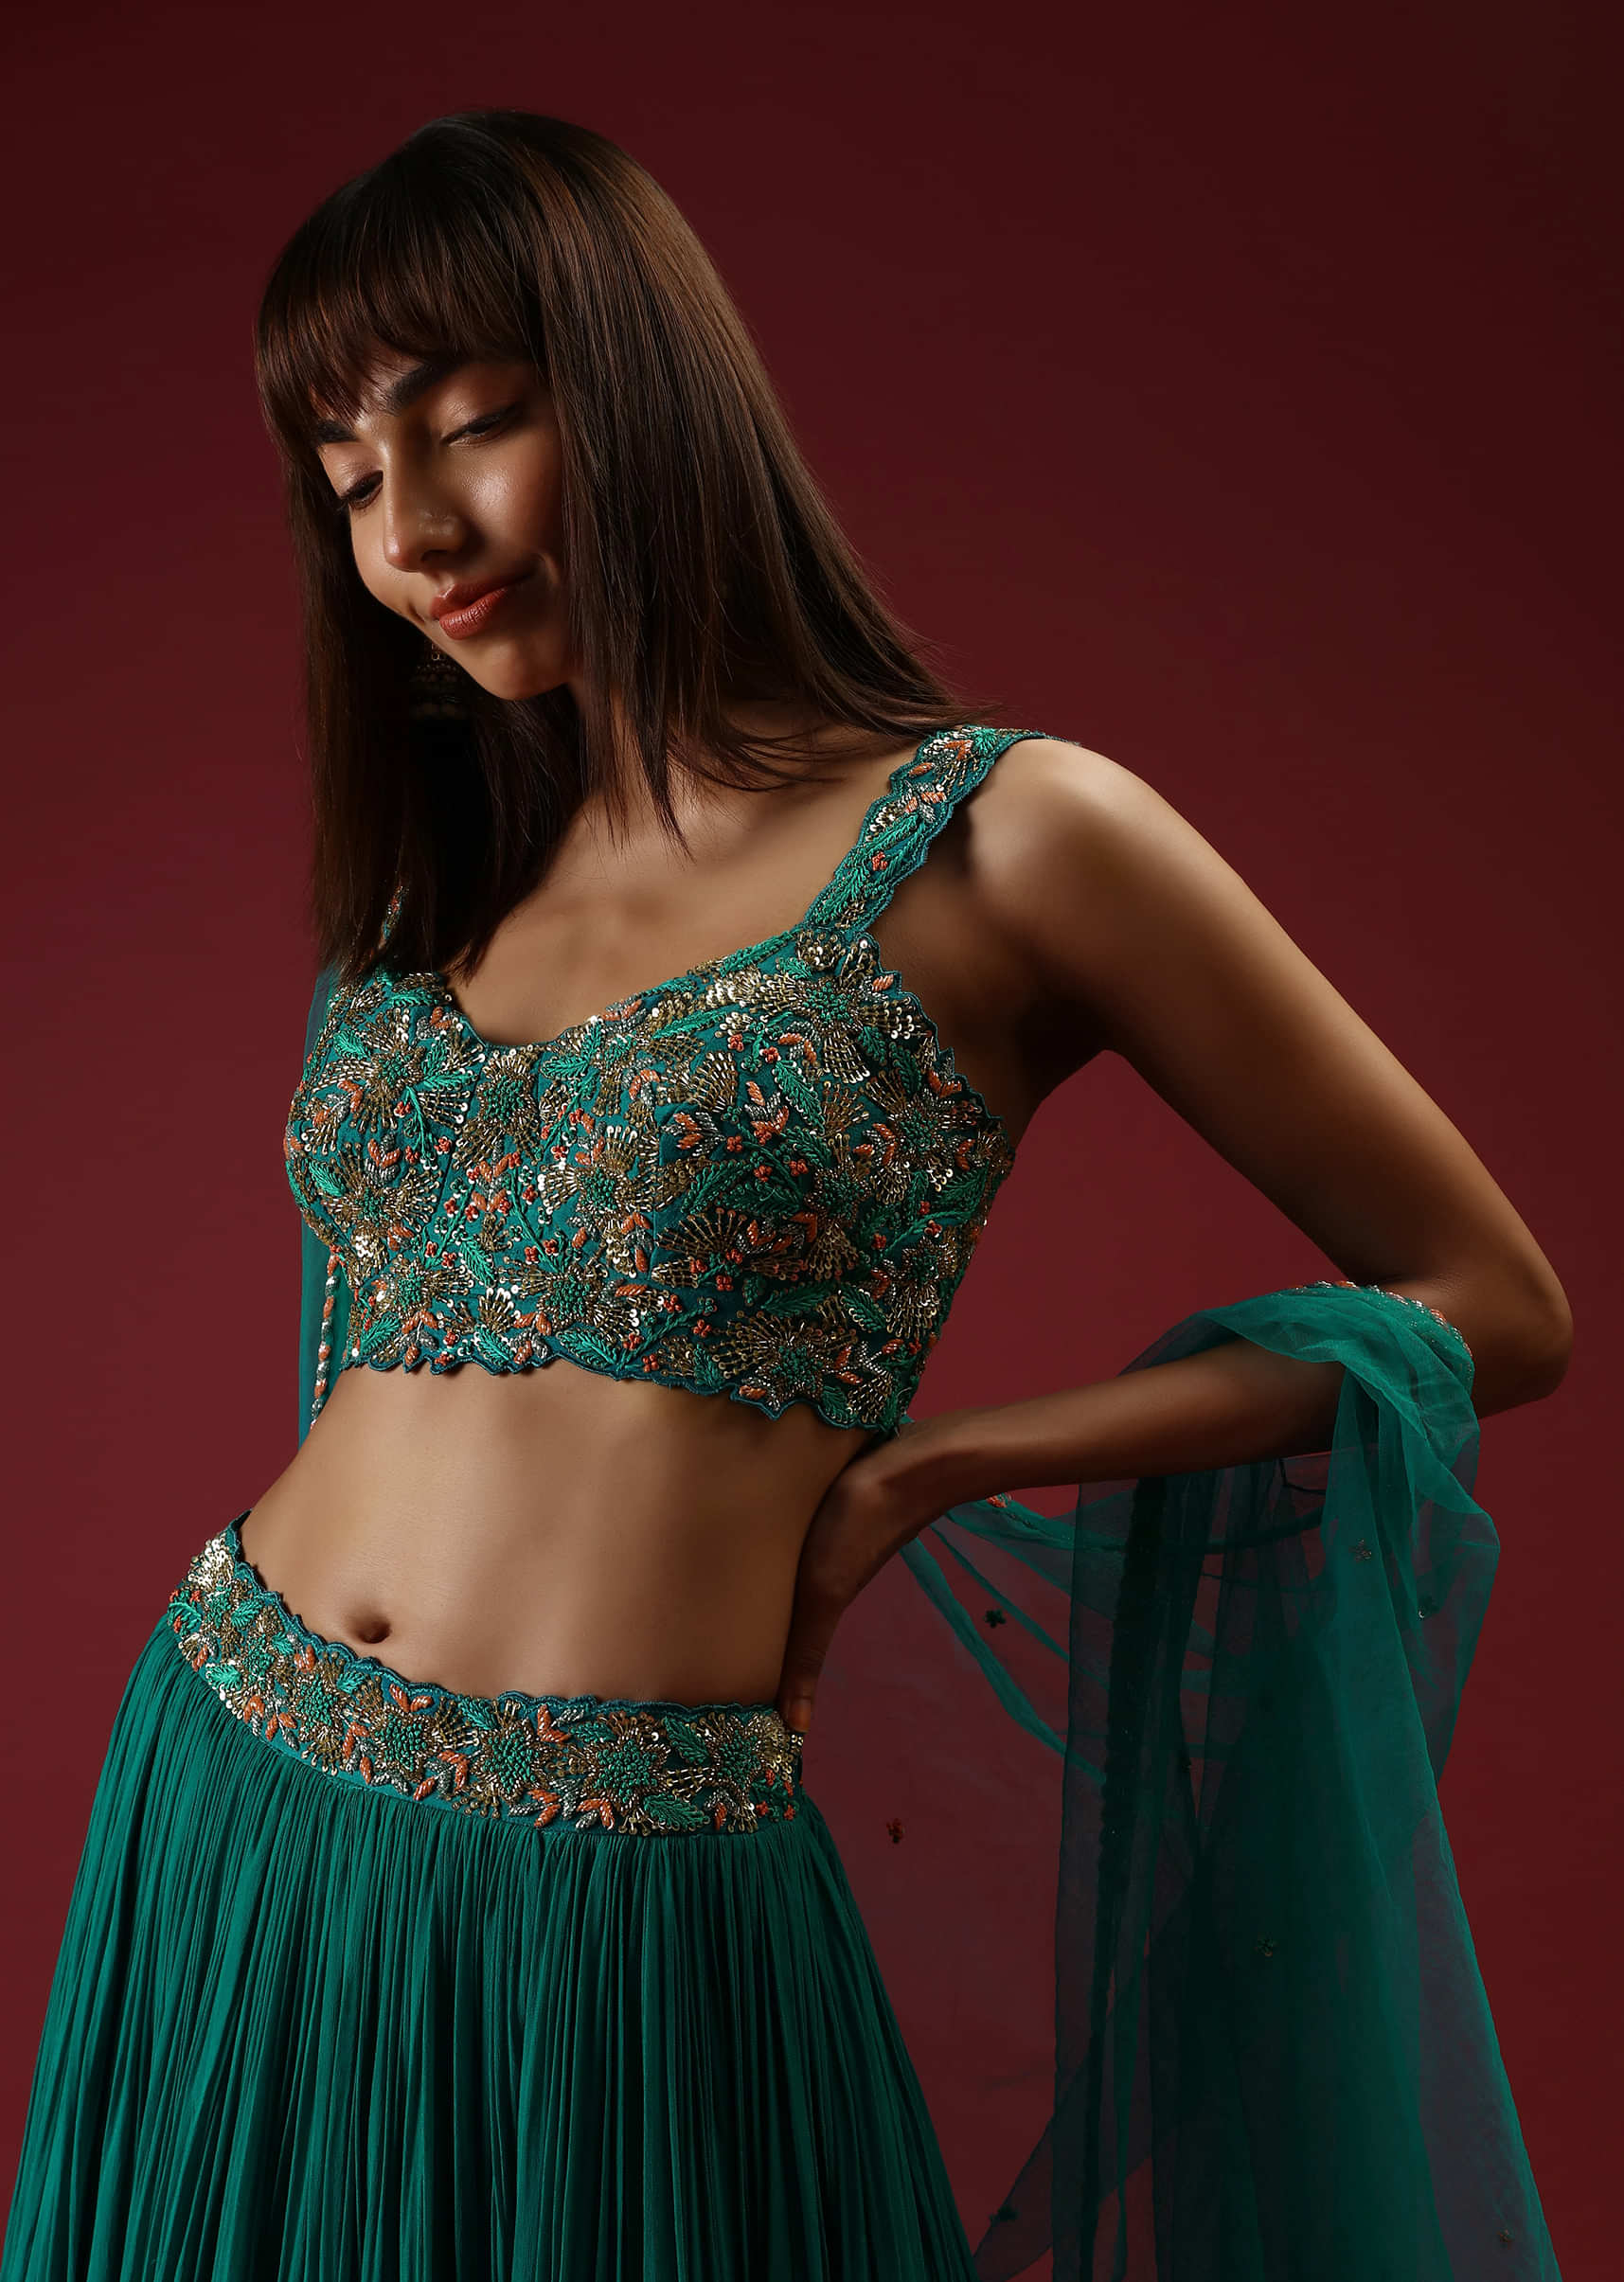 Teal Blue Lehenga Choli With With Multi Colored French Knots And Cut Dana Embroidered Floral Jaal And Matching Cape 